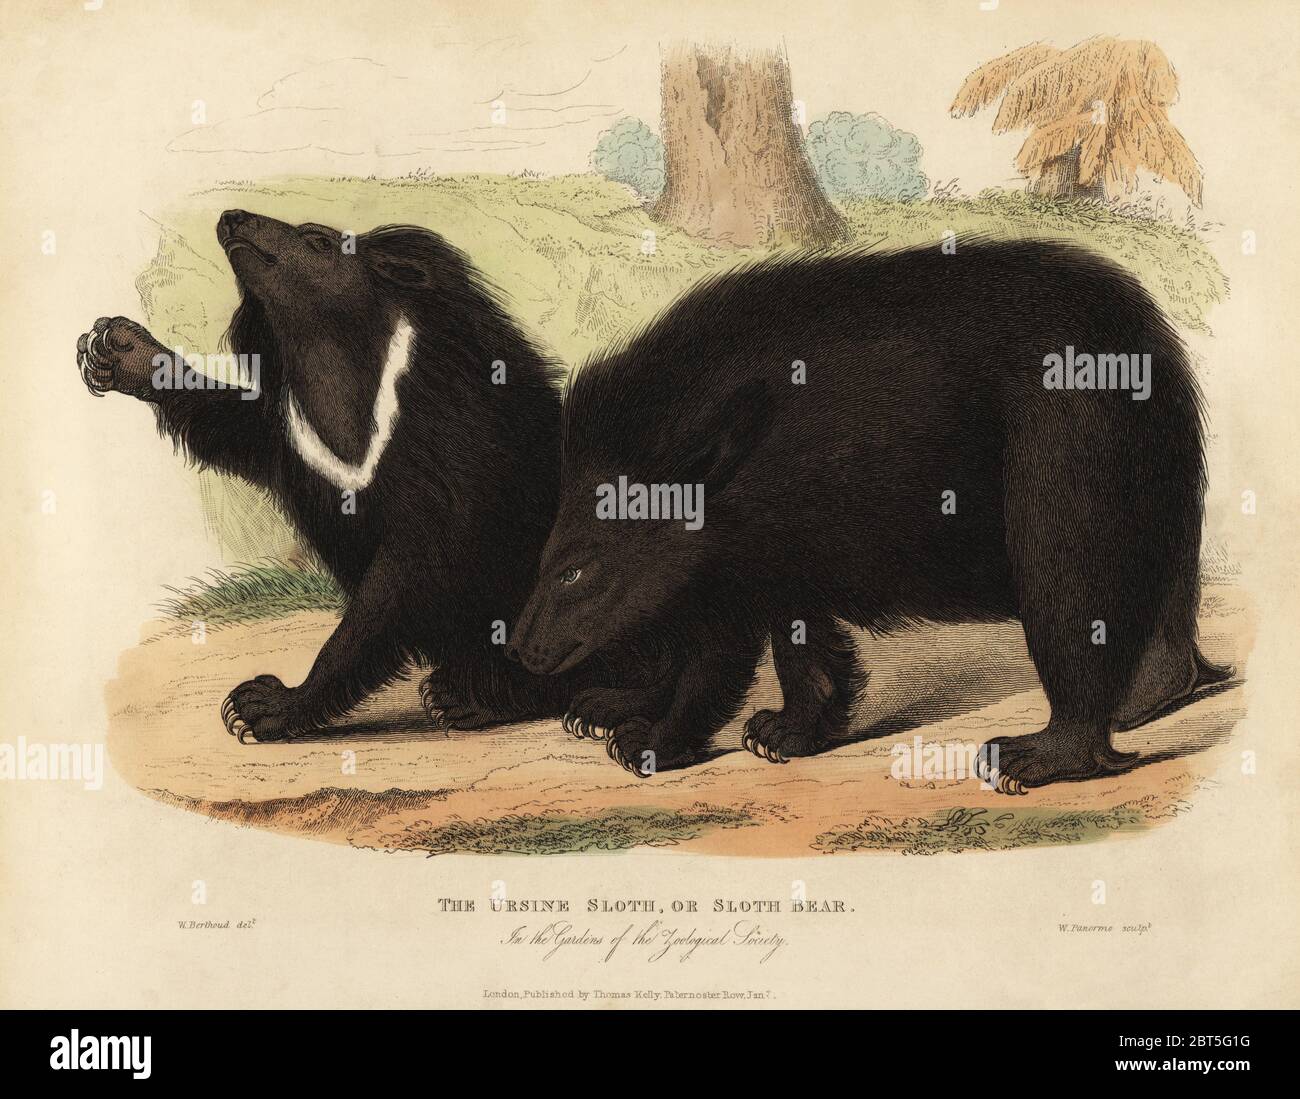 Sloth bear, Melursus ursinus. Vulnerable. The Ursine Sloth in the Gardens of the Zoological Society. Handcoloured copperplate engraved by W. Panormo after an illustration by W. Berthoud from William Smellies translation of Count Georges Buffons History of the Earth and Animated Nature, Thomas Kelly, London, 1829. Stock Photo